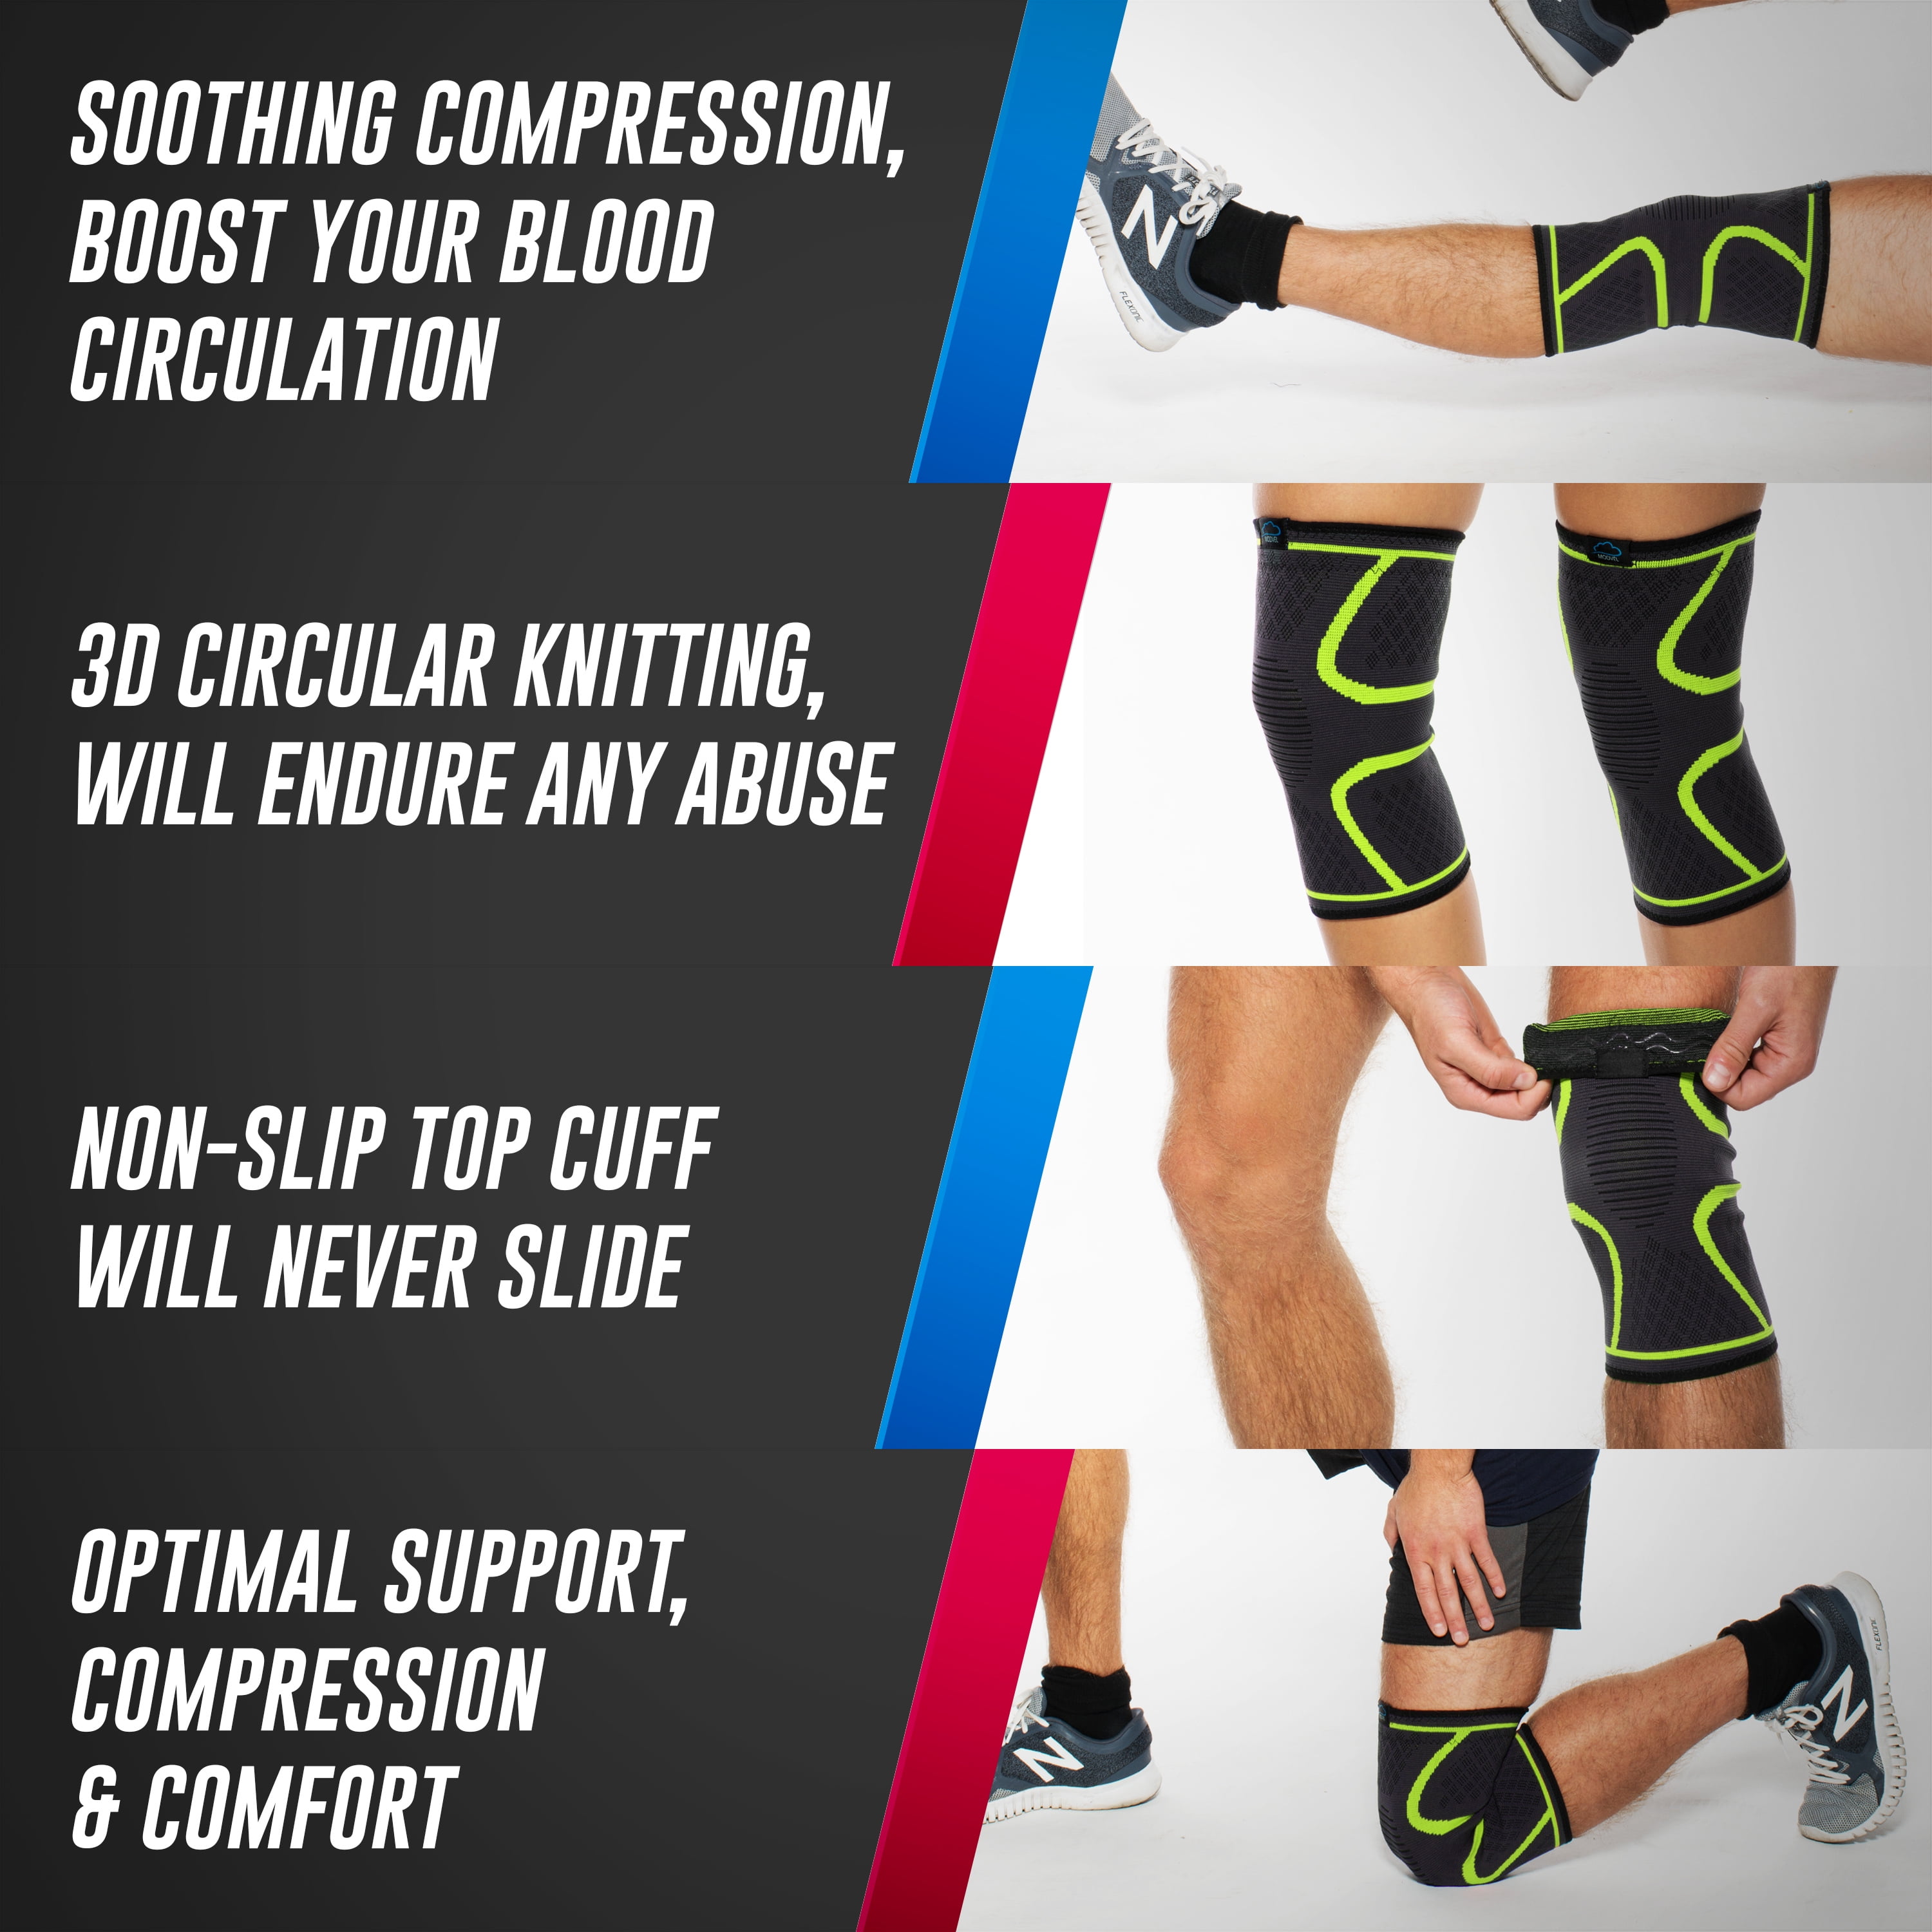 Volleyball 1 Pair Modvel Compression Knee Sleeve - Ultra Flexible Stabilizer for Arthritis and Knee Pain Relief ACL Great for All Athletics MV-111 M Comfortable Knee Brace for Men and Women 